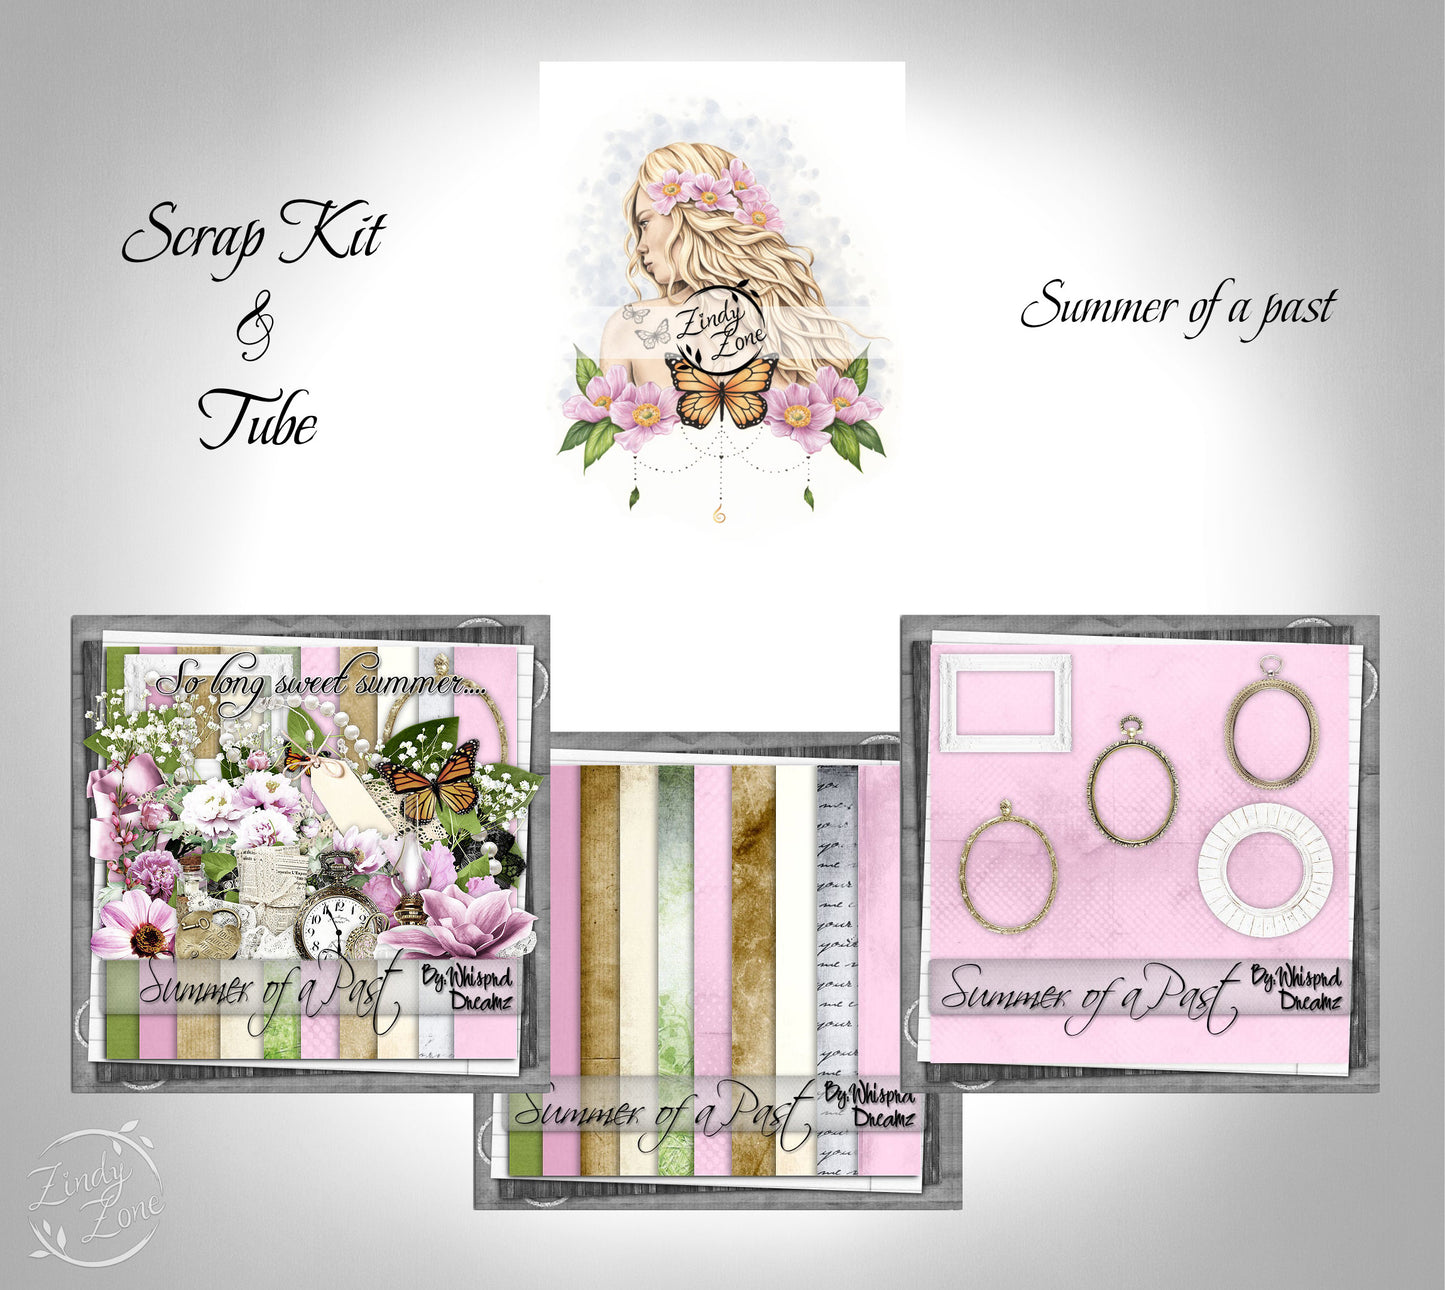 Summer of a past - Scrap Kit and Tube Pack